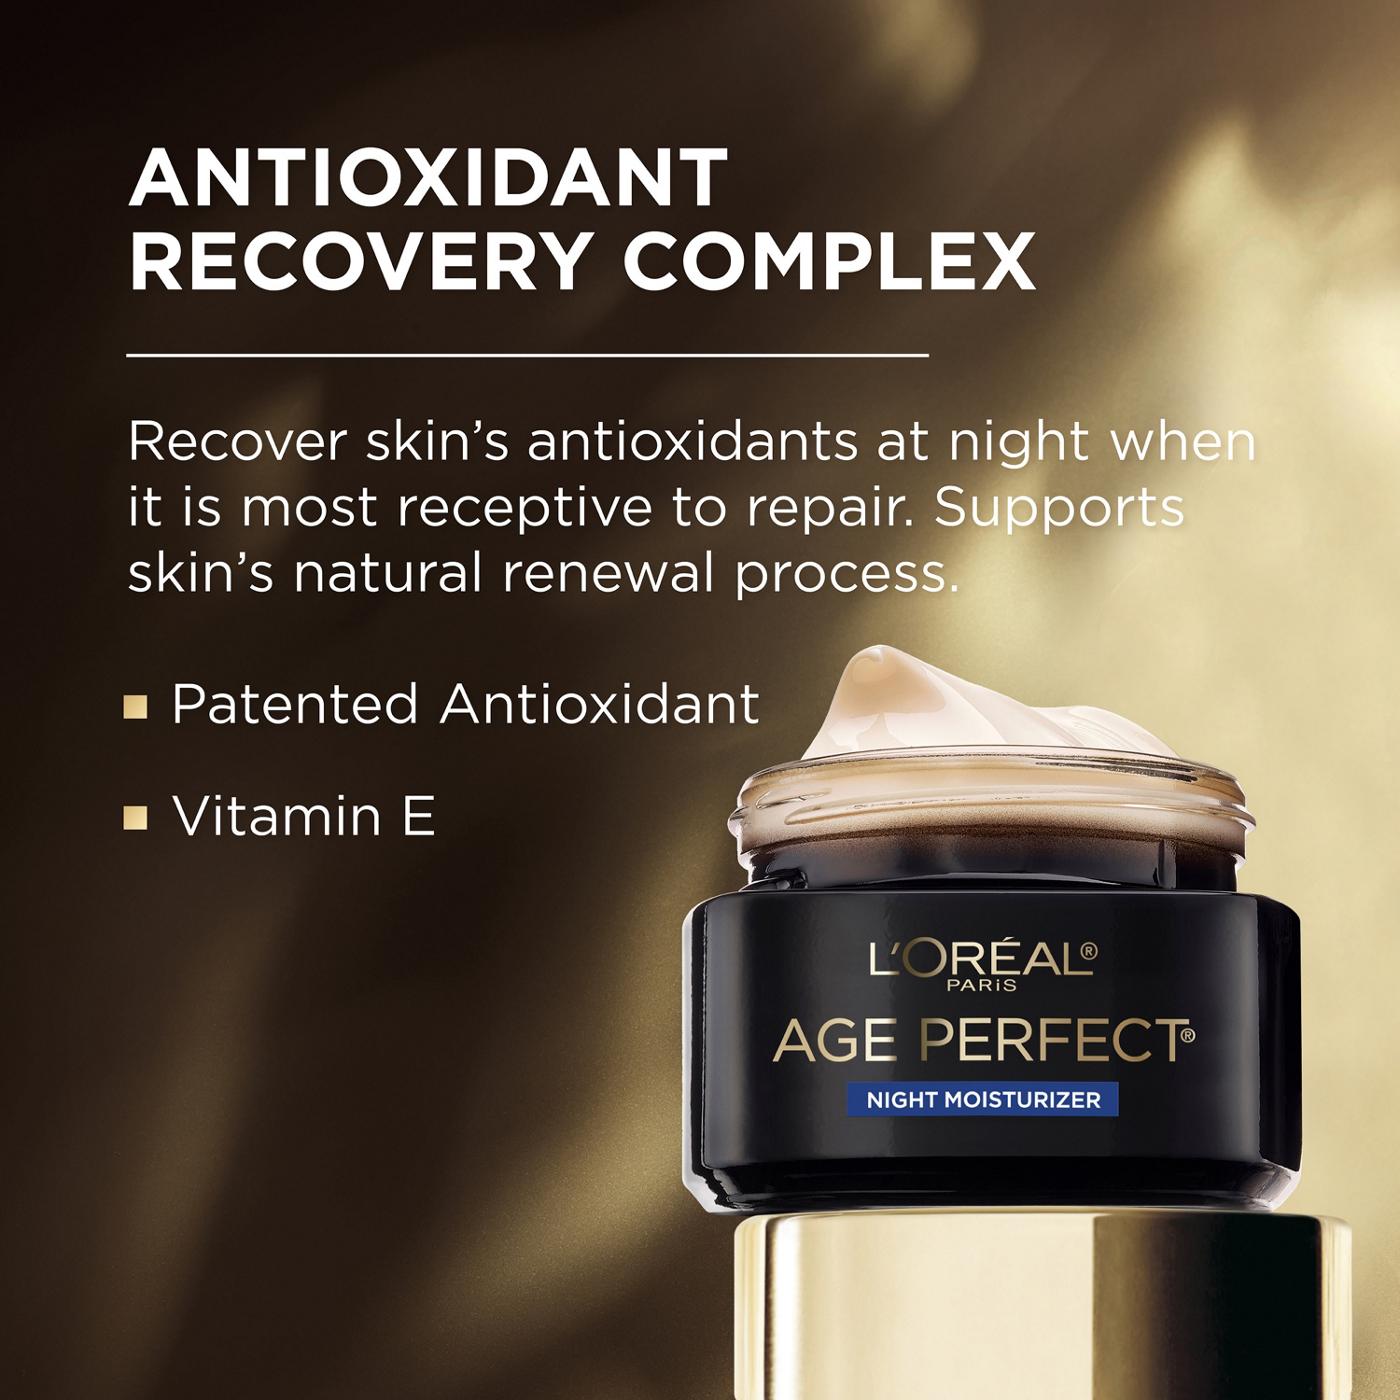 L'Oréal Paris Age Perfect Cell Renewal Anti-Aging Night Moisturizer; image 2 of 5